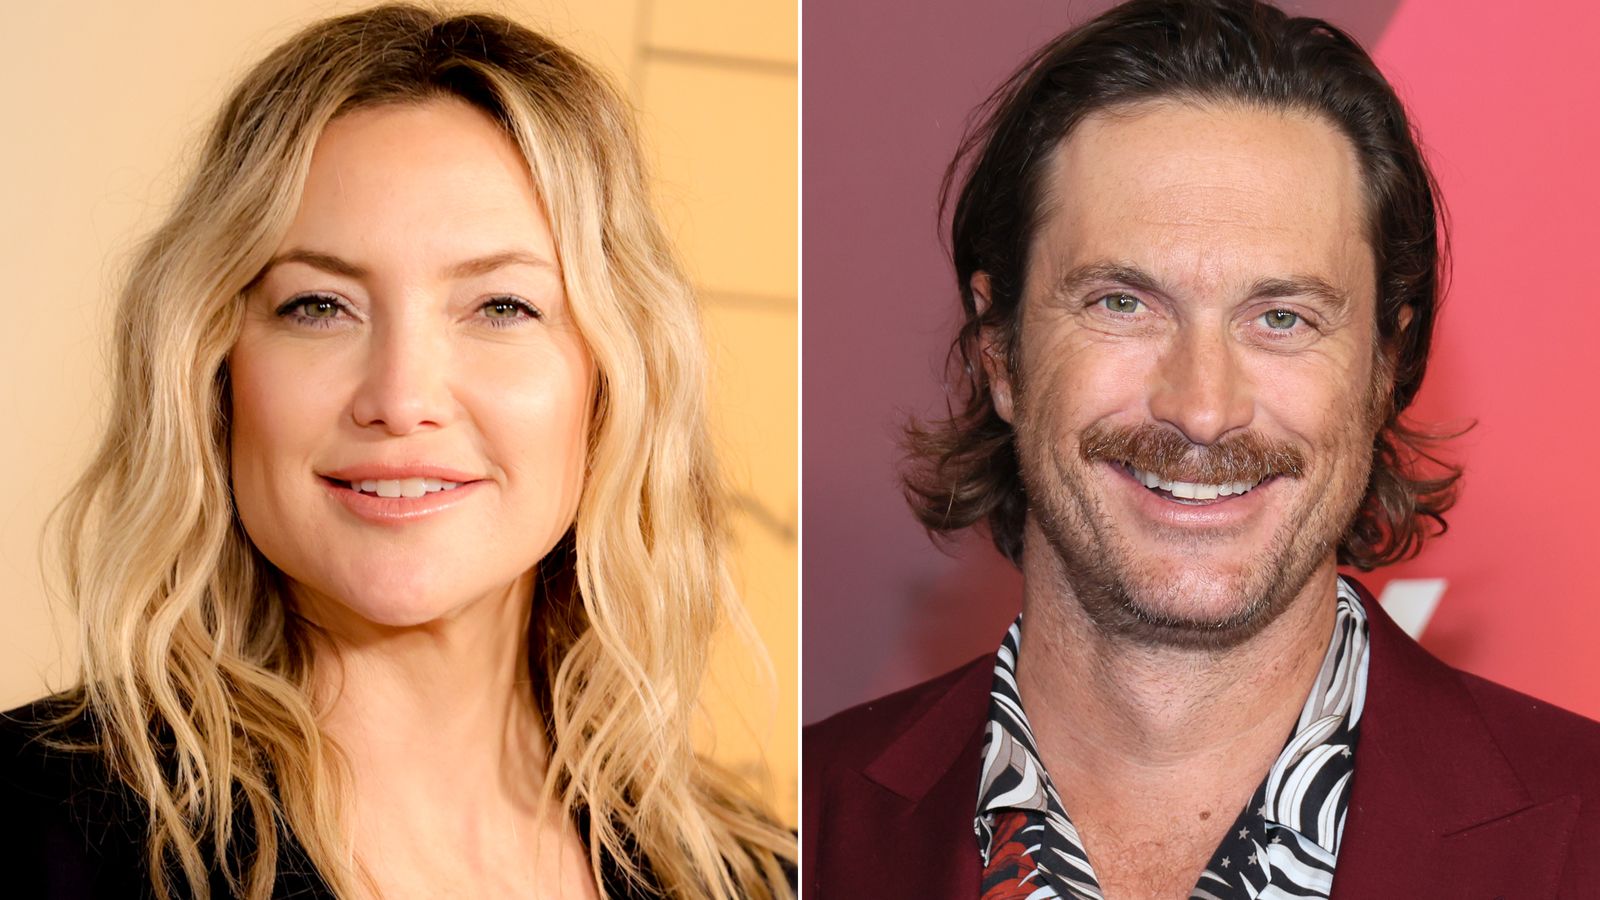 Email sollys overdrive Kate Hudson's brother Oliver reacted to her topless Instagram pic | CNN